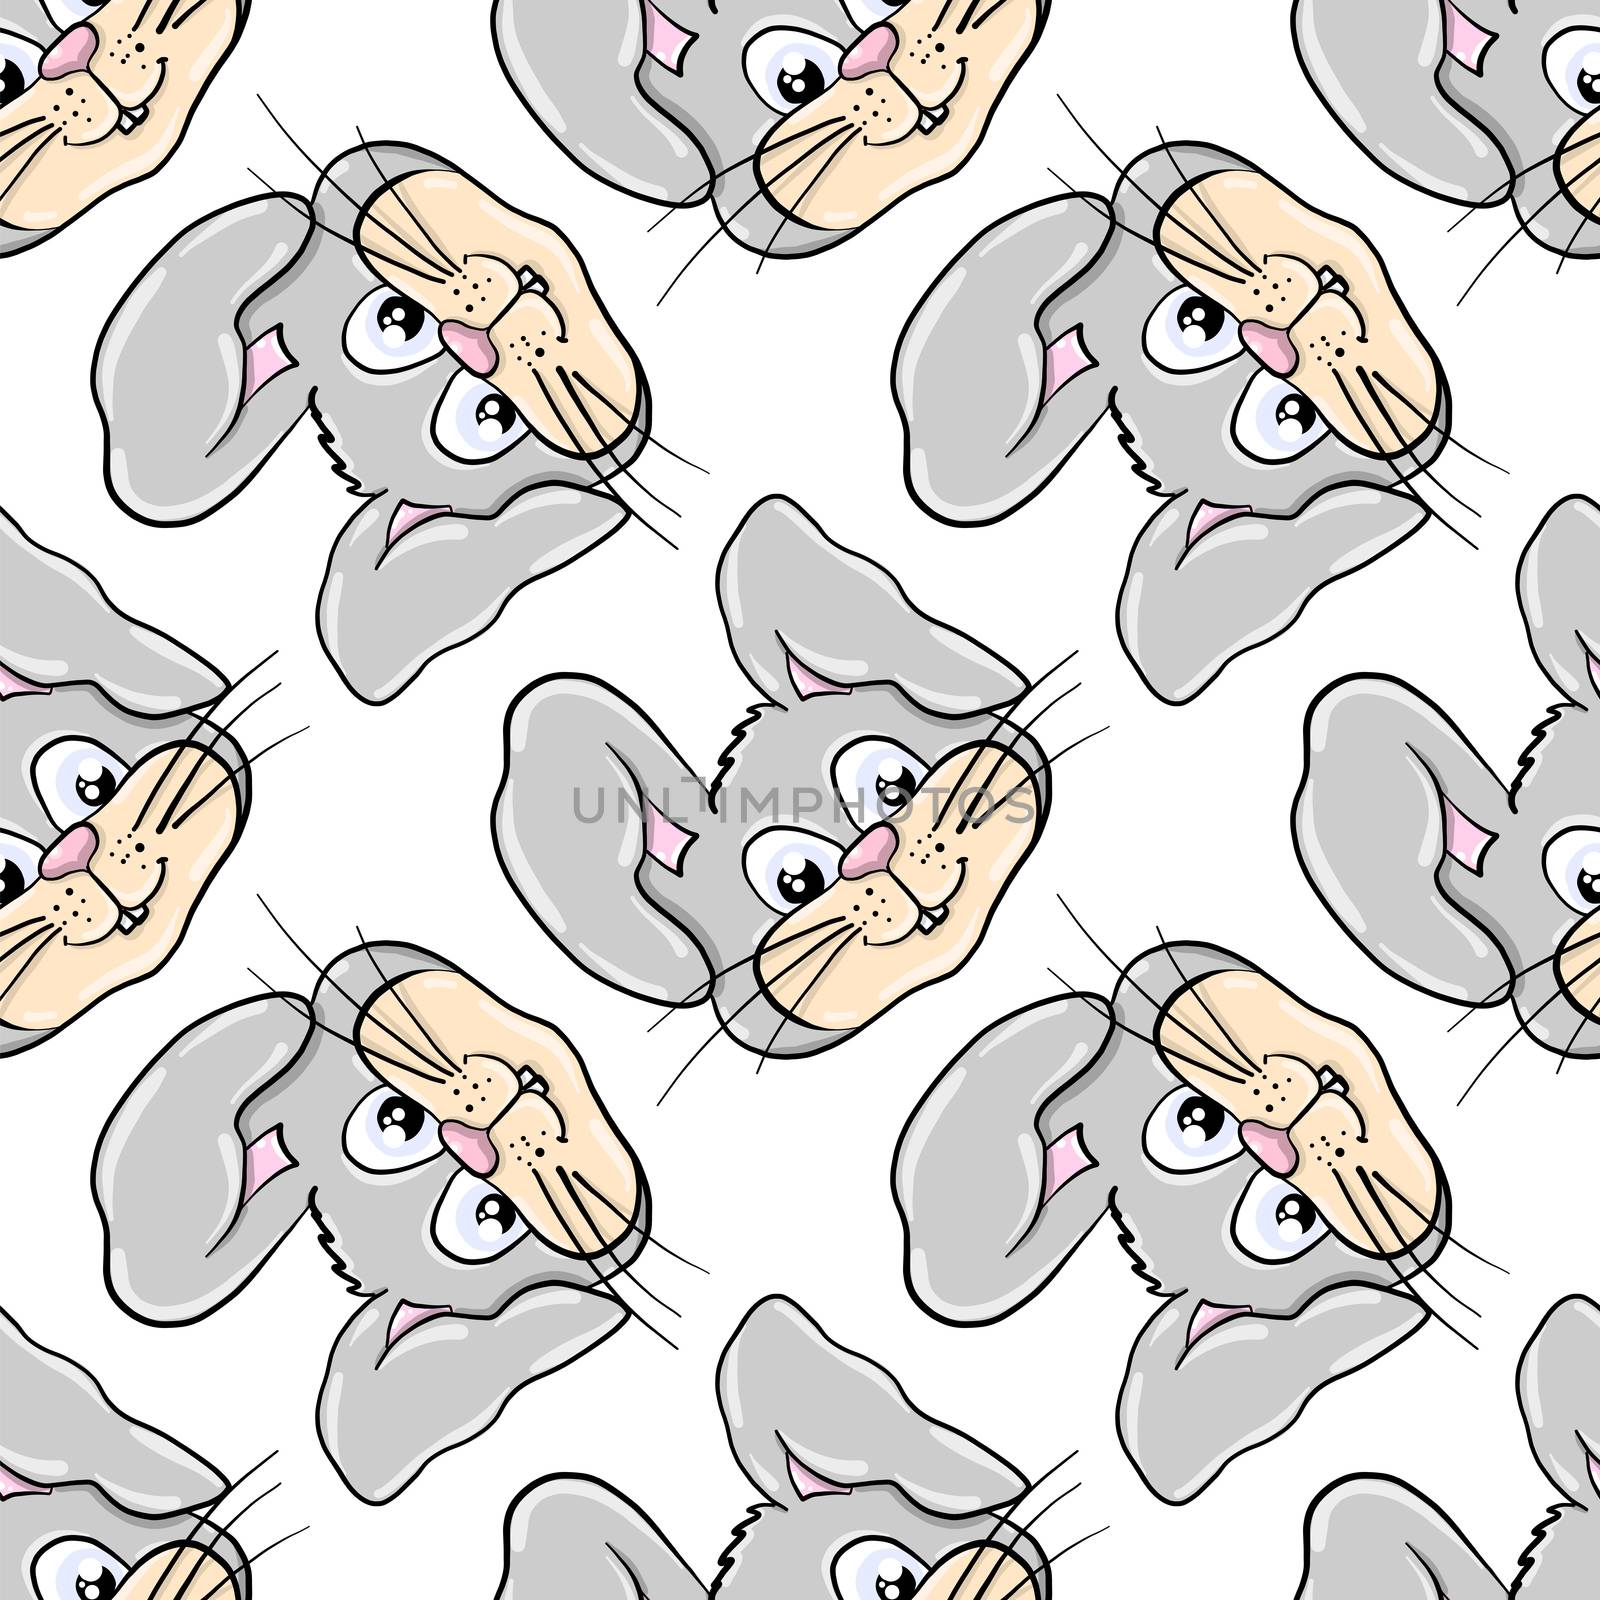 Bunny head pattern , illustration, vector on white background